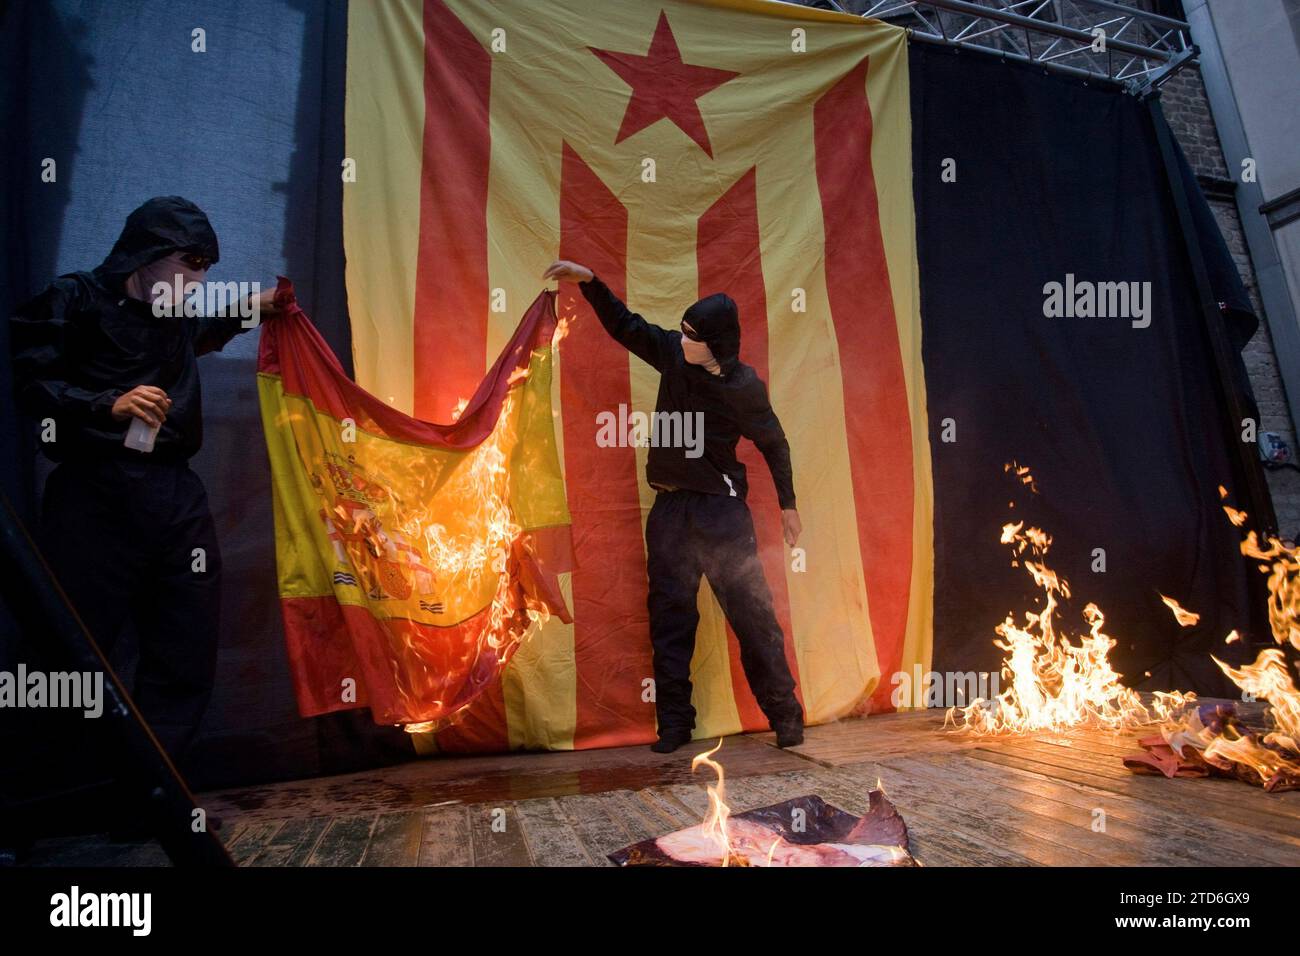 Barcelona, 09/11/2011. Independence demonstration in the Catalan Diada. Burning of the King's photo, burning of the Spanish flag. Photo: Inés Baucells. ARCHDC. Credit: Album / Archivo ABC / Inés Baucells Stock Photo